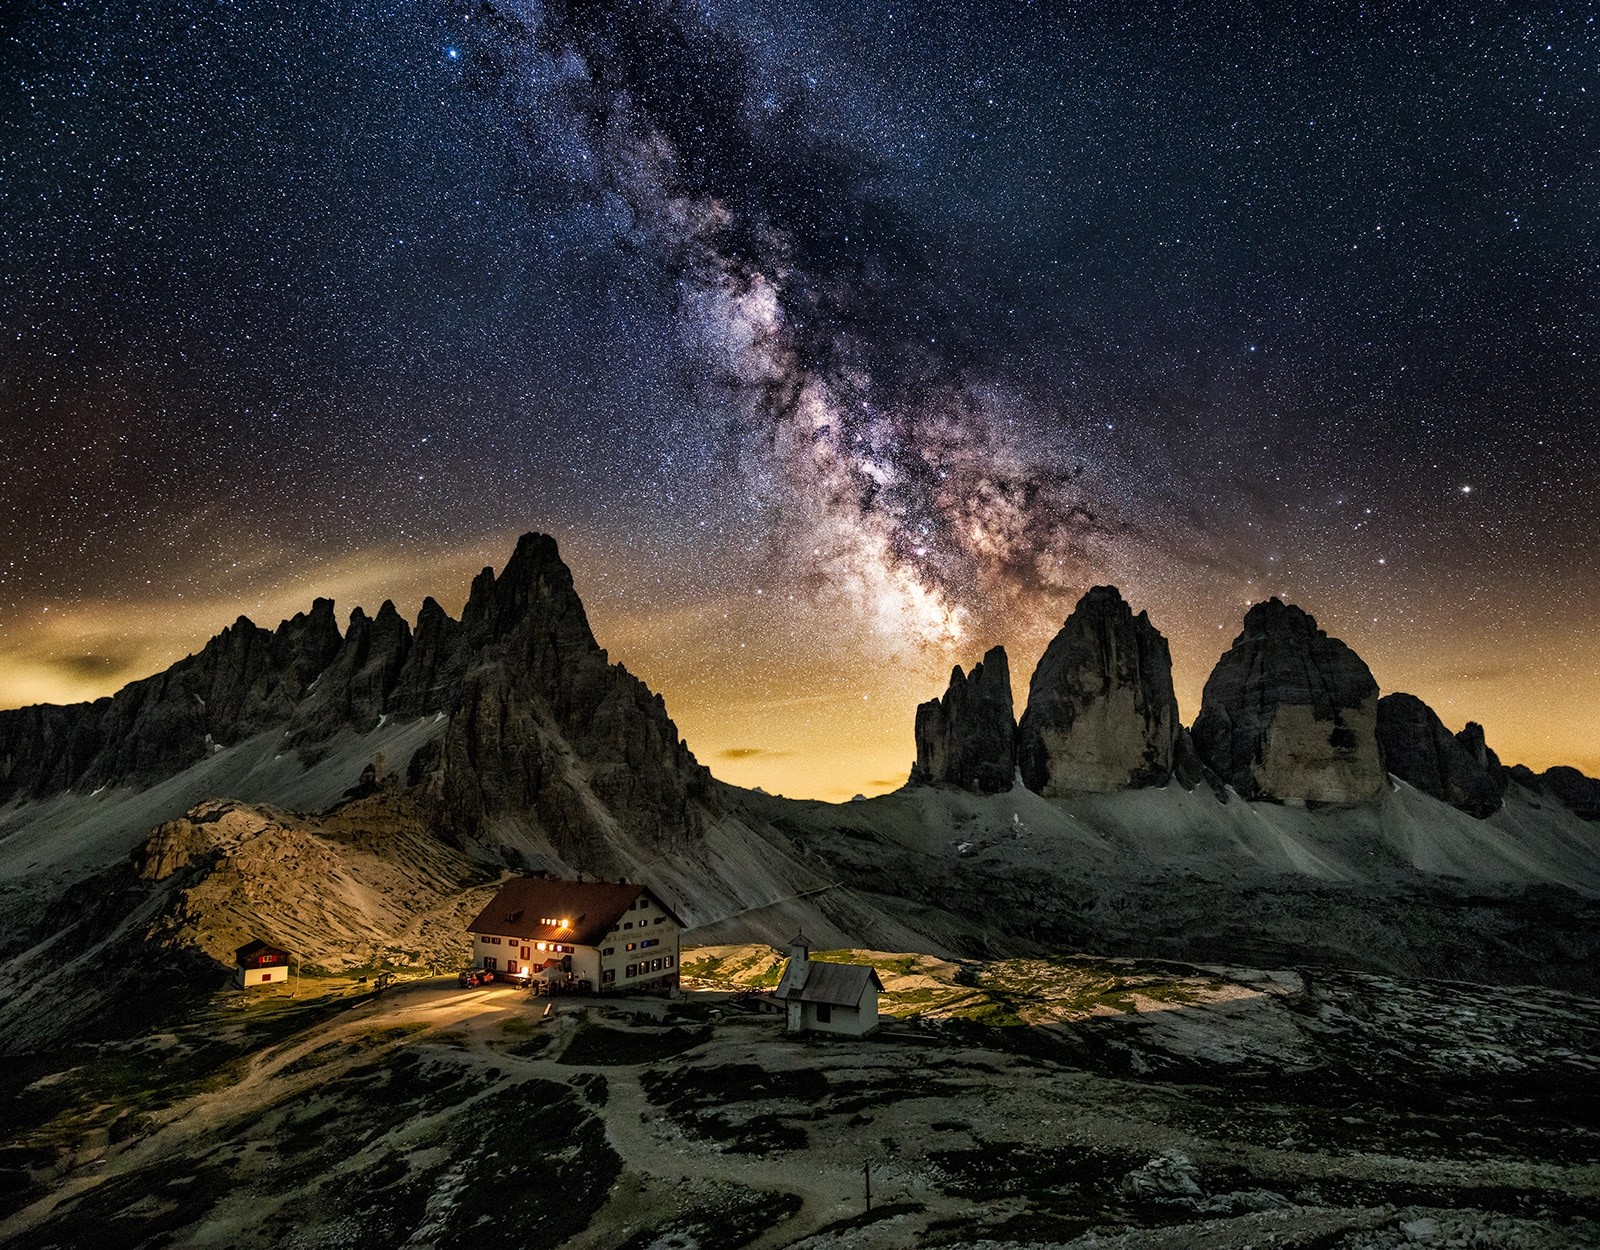 General 1600x1250 nature landscape Milky Way galaxy mountains starry night cabin summer Dolomites Italy long exposure